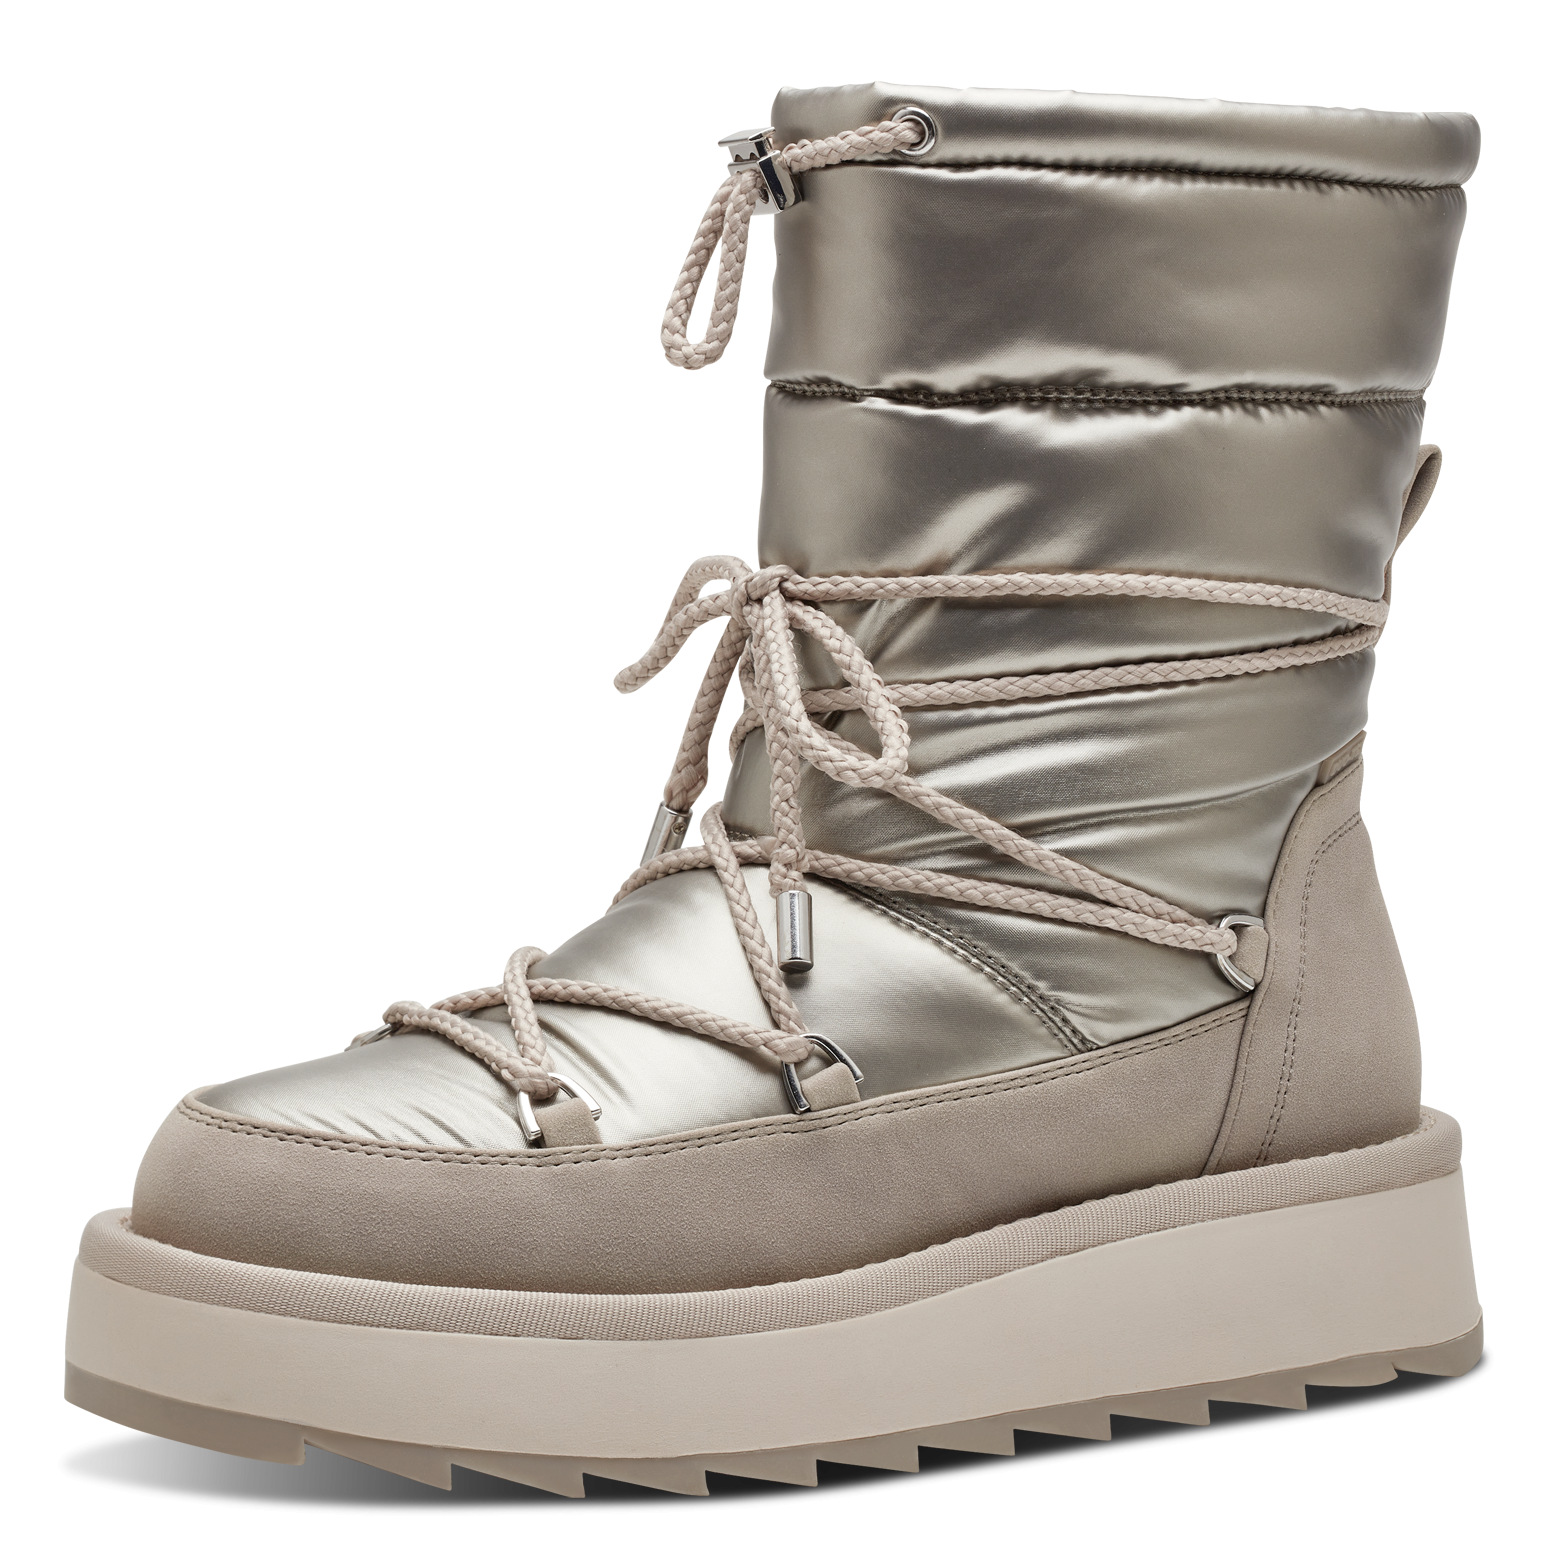 Stiefel - Champagne Synthetik